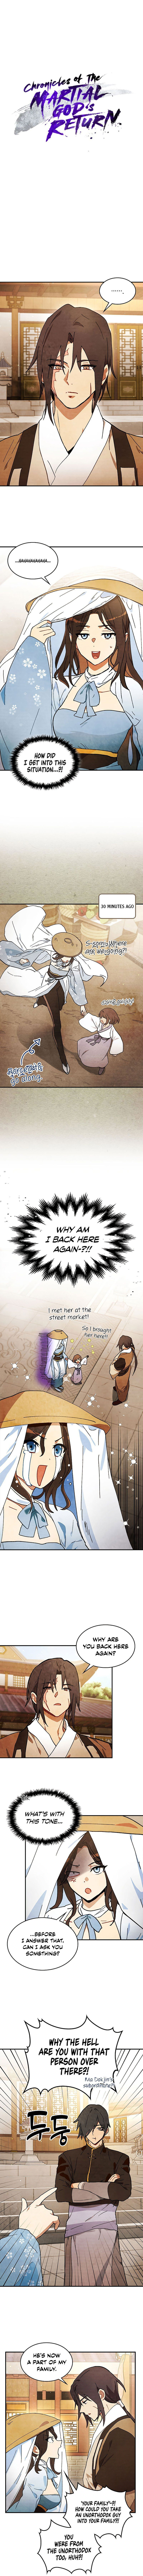 chronicles-of-the-martial-gods-return-chap-32-1